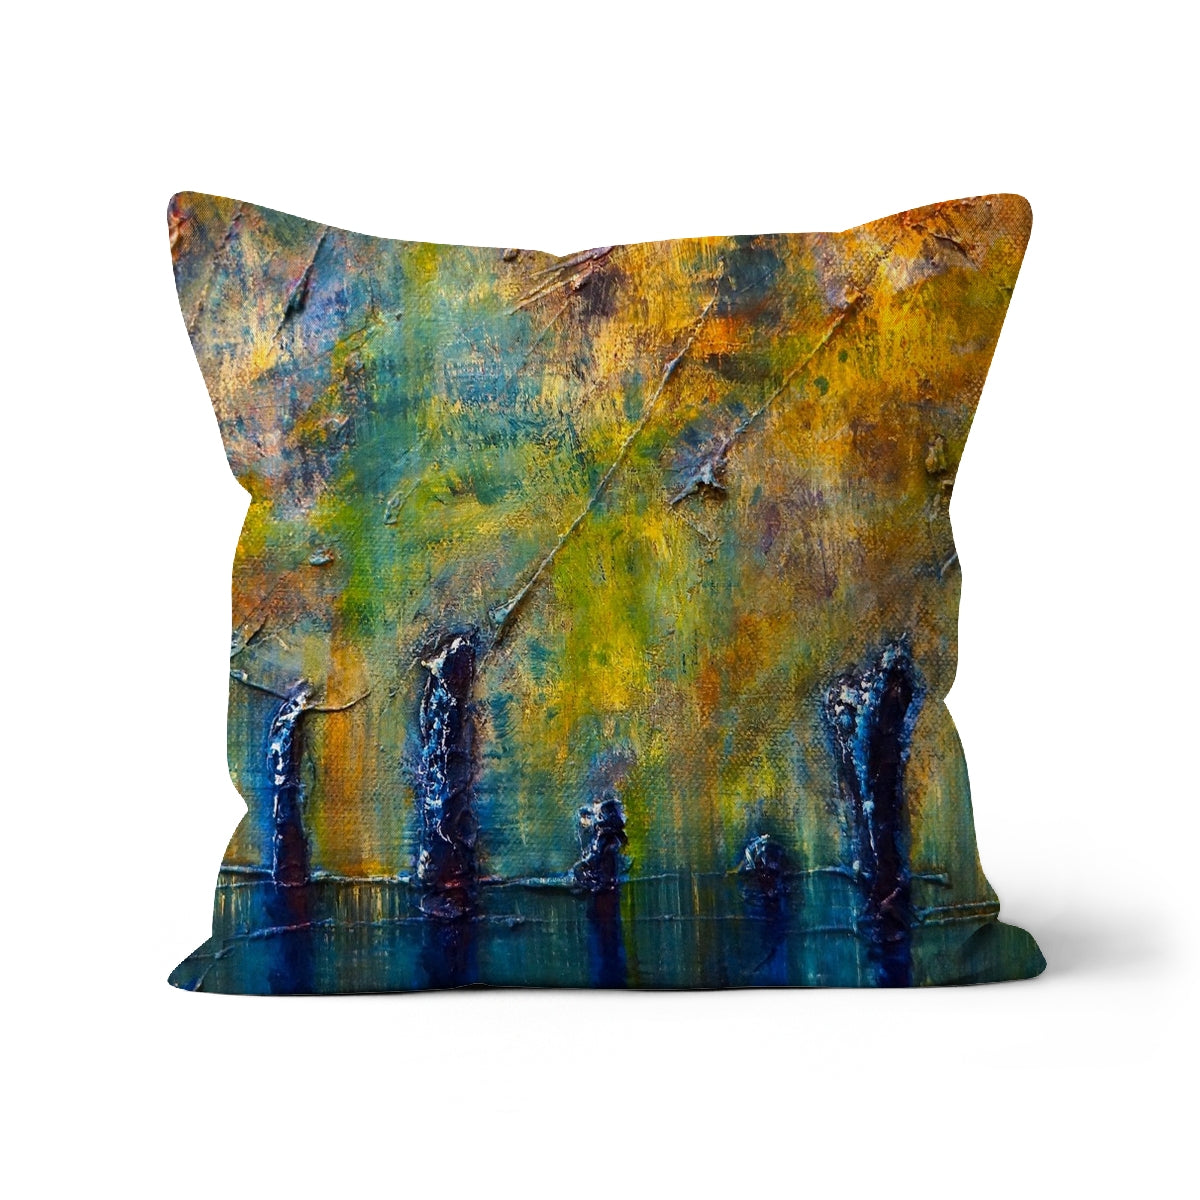 Stenness Moonlight Orkney Art Gifts Cushion-Cushions-Orkney Art Gallery-Faux Suede-12"x12"-Paintings, Prints, Homeware, Art Gifts From Scotland By Scottish Artist Kevin Hunter